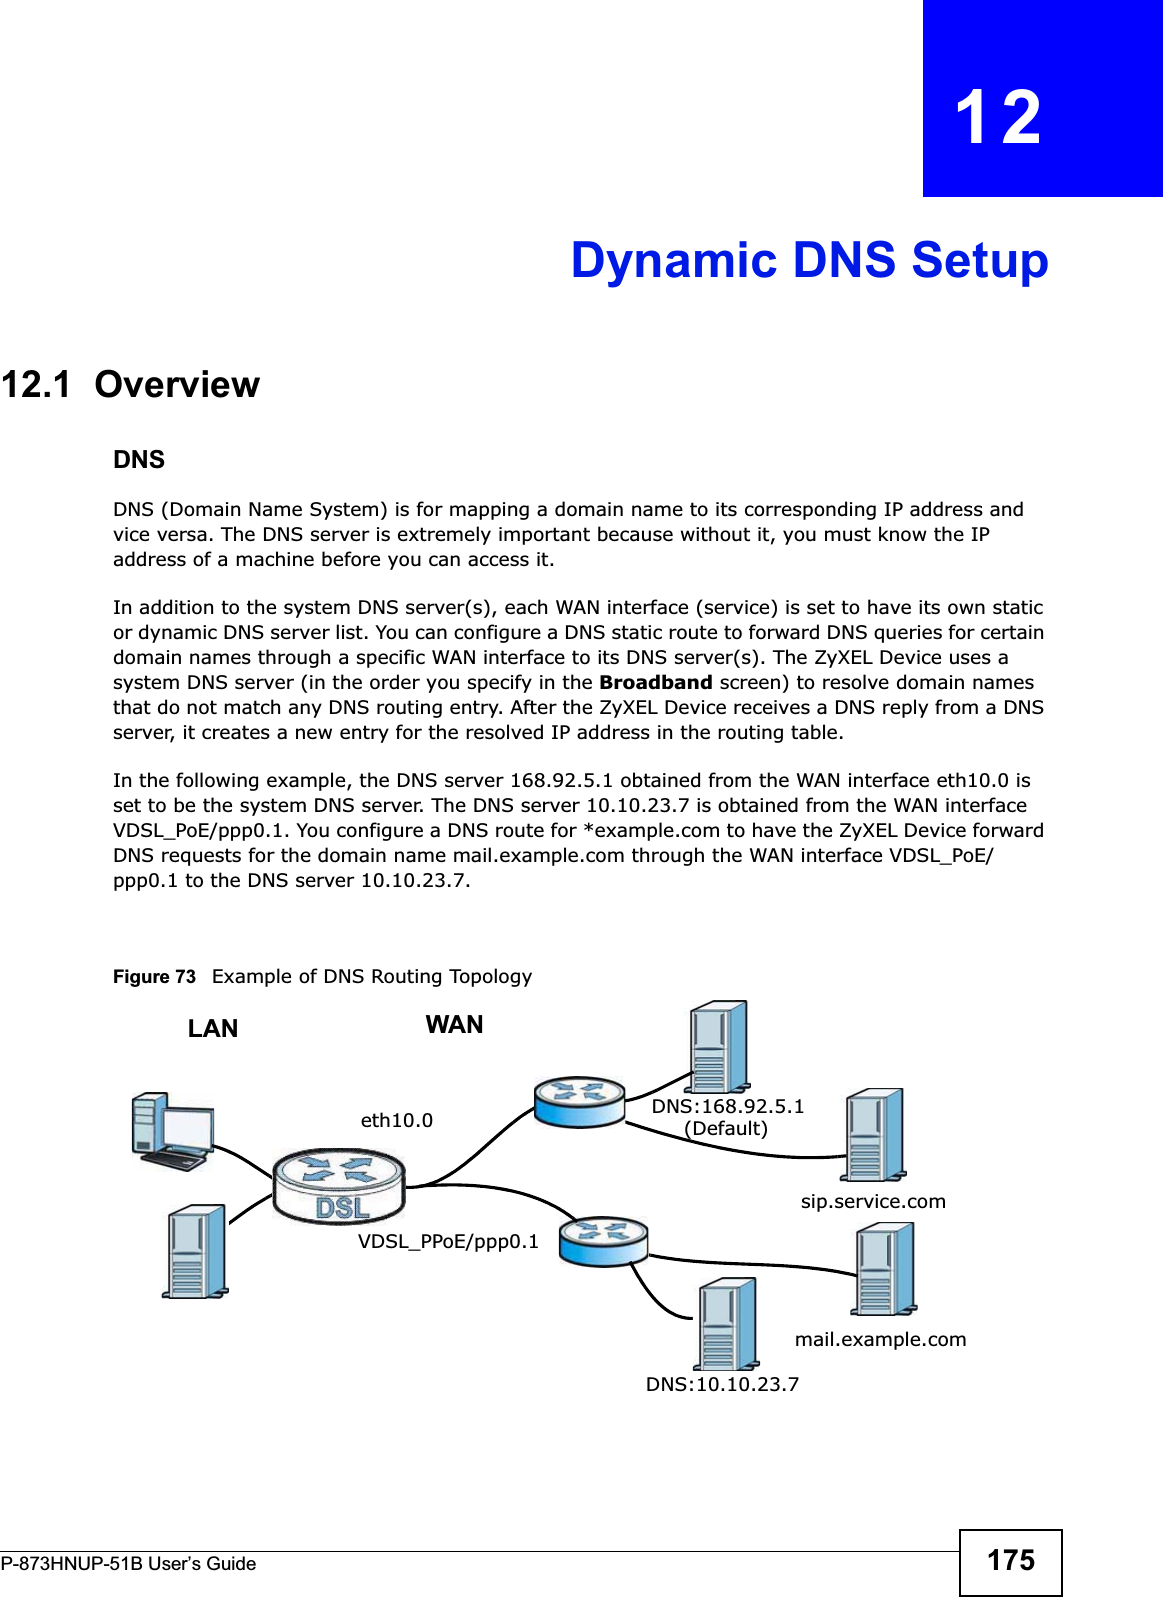 P-873HNUP-51B User’s Guide 175CHAPTER   12Dynamic DNS Setup12.1  Overview DNSDNS (Domain Name System) is for mapping a domain name to its corresponding IP address and vice versa. The DNS server is extremely important because without it, you must know the IP address of a machine before you can access it. In addition to the system DNS server(s), each WAN interface (service) is set to have its own static or dynamic DNS server list. You can configure a DNS static route to forward DNS queries for certain domain names through a specific WAN interface to its DNS server(s). The ZyXEL Device uses a system DNS server (in the order you specify in the Broadband screen) to resolve domain names that do not match any DNS routing entry. After the ZyXEL Device receives a DNS reply from a DNS server, it creates a new entry for the resolved IP address in the routing table.In the following example, the DNS server 168.92.5.1 obtained from the WAN interface eth10.0 is set to be the system DNS server. The DNS server 10.10.23.7 is obtained from the WAN interface VDSL_PoE/ppp0.1. You configure a DNS route for *example.com to have the ZyXEL Device forward DNS requests for the domain name mail.example.com through the WAN interface VDSL_PoE/ppp0.1 to the DNS server 10.10.23.7.Figure 73   Example of DNS Routing TopologyWANLANeth10.0VDSL_PPoE/ppp0.1DNS:10.10.23.7DNS:168.92.5.1sip.service.commail.example.com(Default)